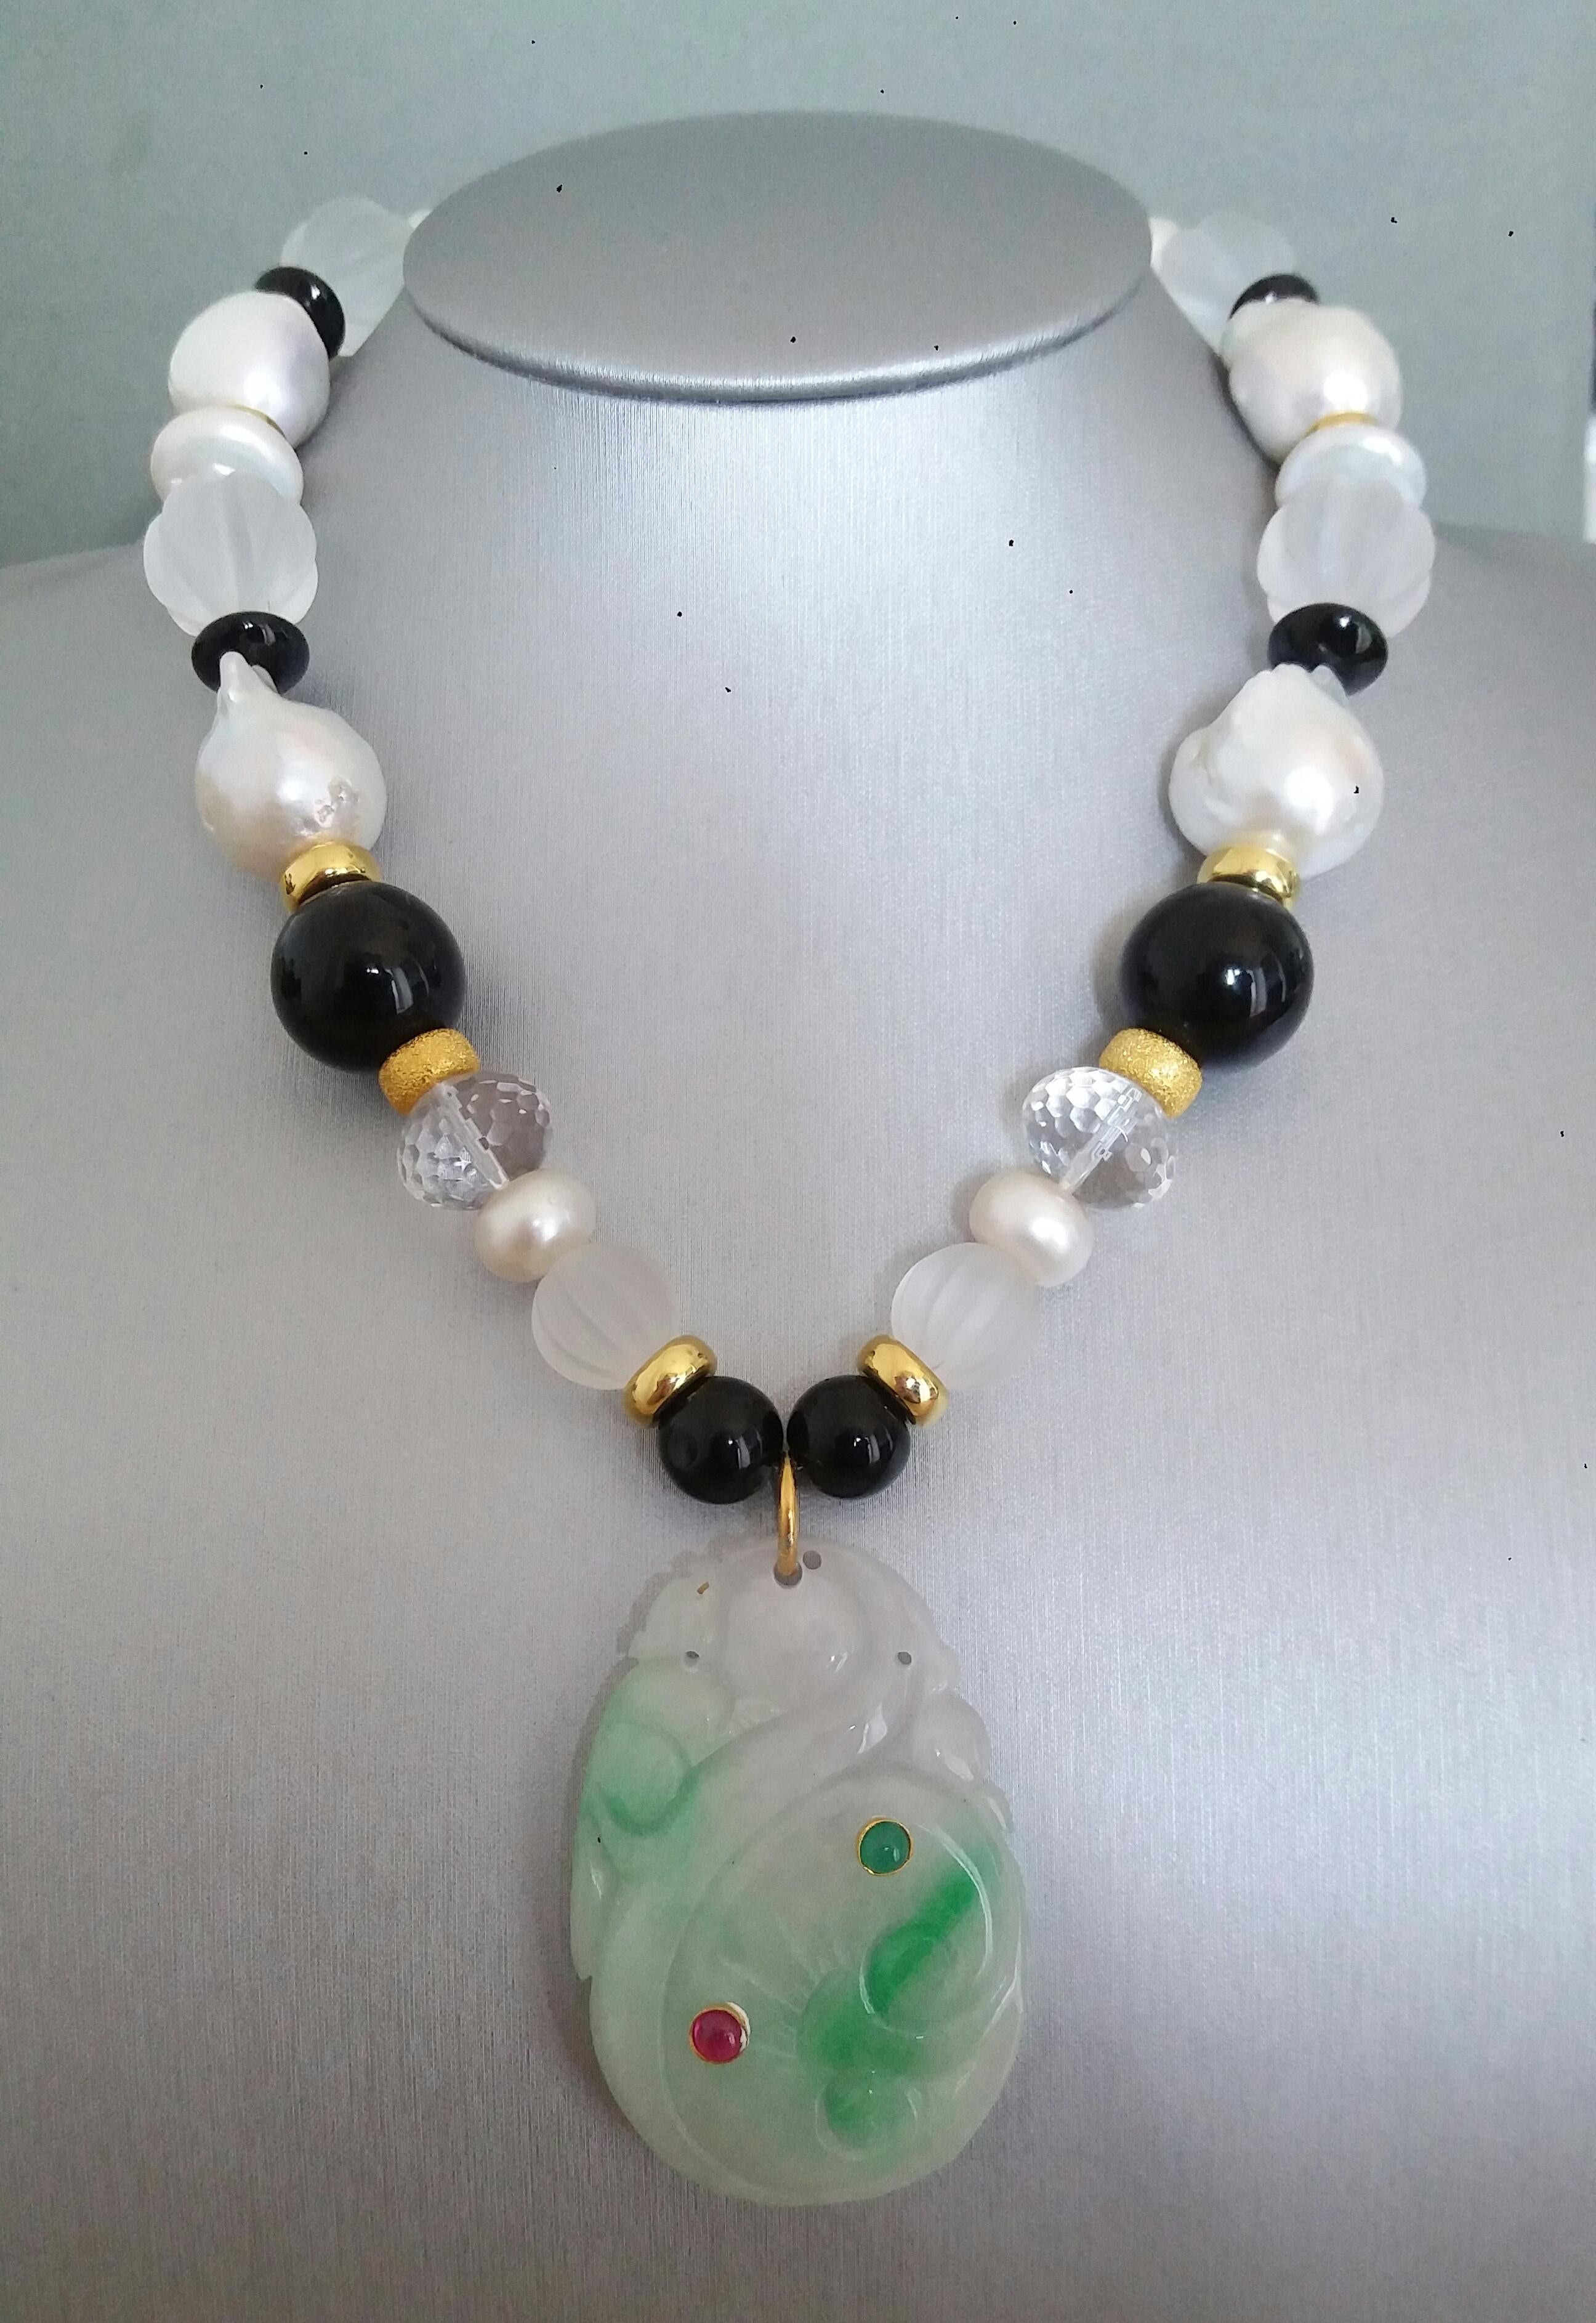 Unique and classic Necklace composed of big size Baroque Pearls, Faceted Quartz, Black Onyx 16 mm diameter, 14 kt Yellow Gold elements, from which hangs a pendant of engraved Green Burma Jade 35x50 mm with 2 small round cabochons of ruby and emerald